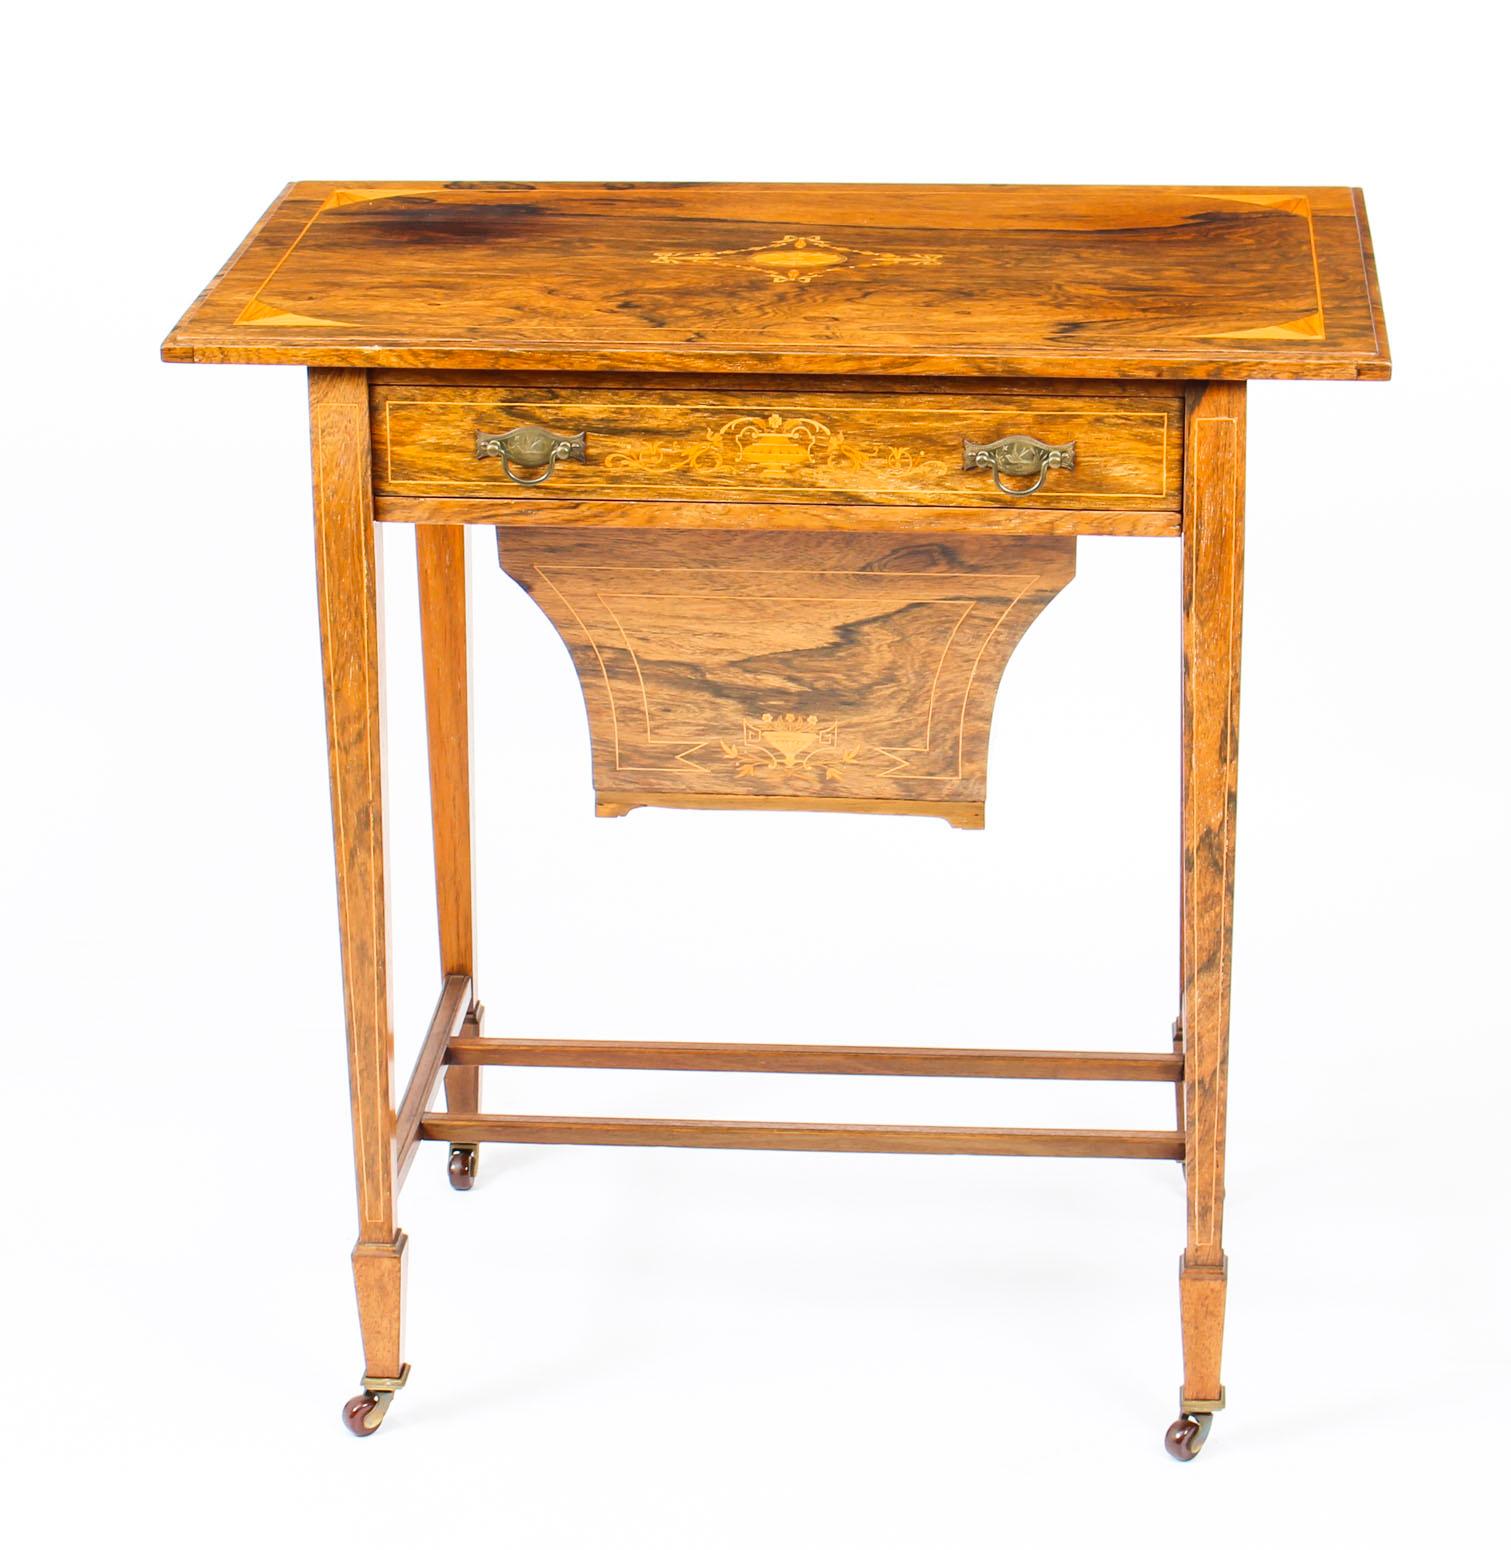 This is an antique English workbox table dating from the late 19th century.

It is made from Gonçalo Alves with fabulous satinwood inlaid decoration. It has a drawer with compartments for cottons, thread, needles, etc, and a large compartment